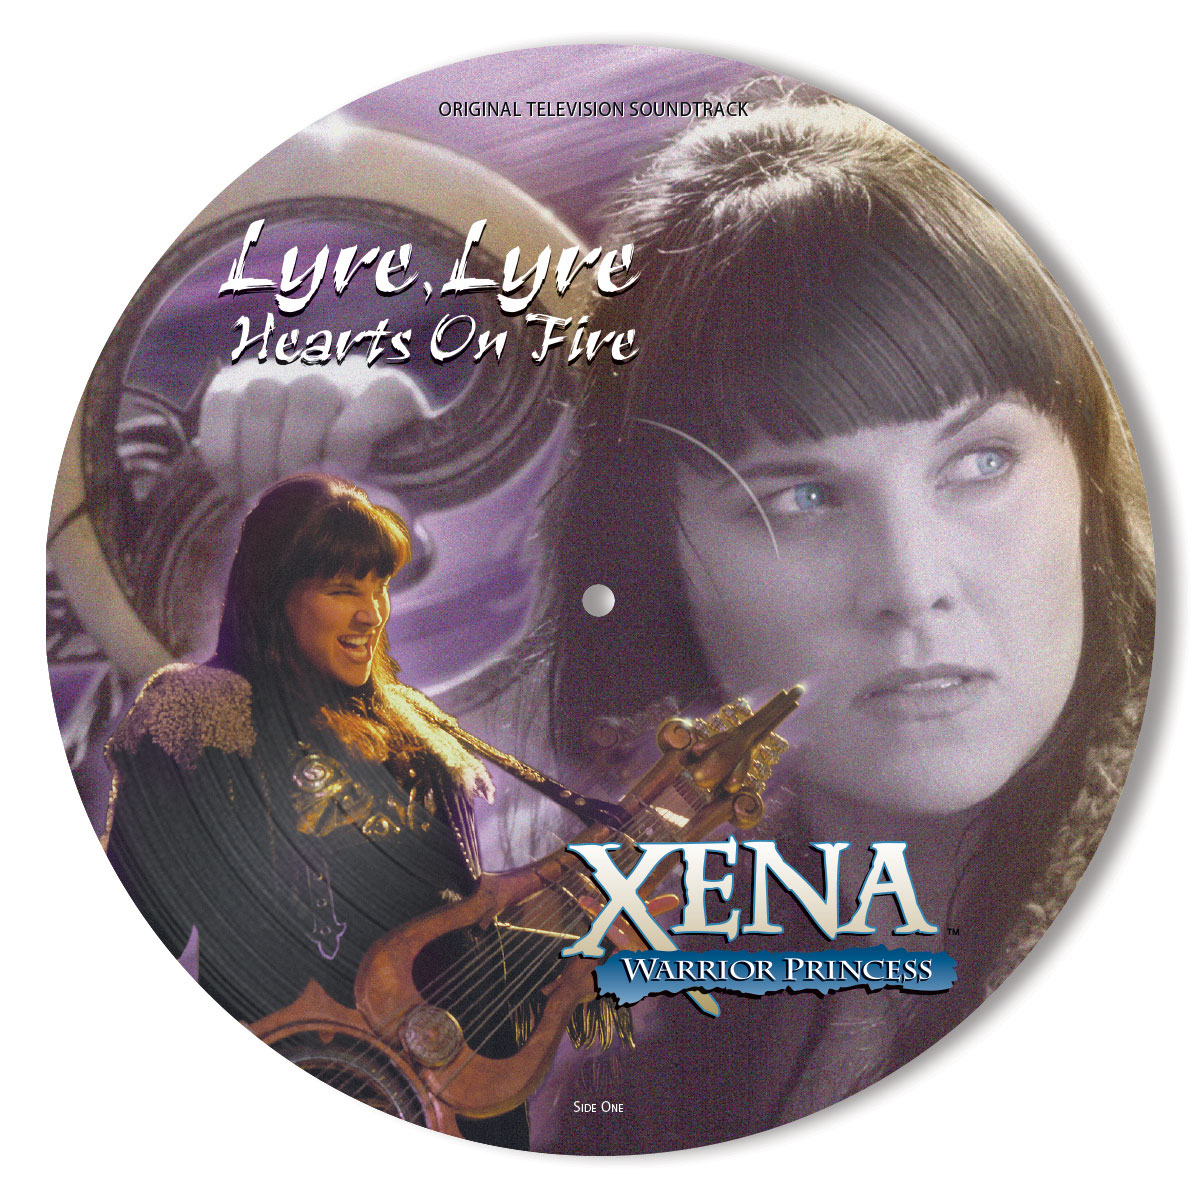 Xena: Warrior Princess - Lyre, Lyre (O.S.T.) - Picture Disc